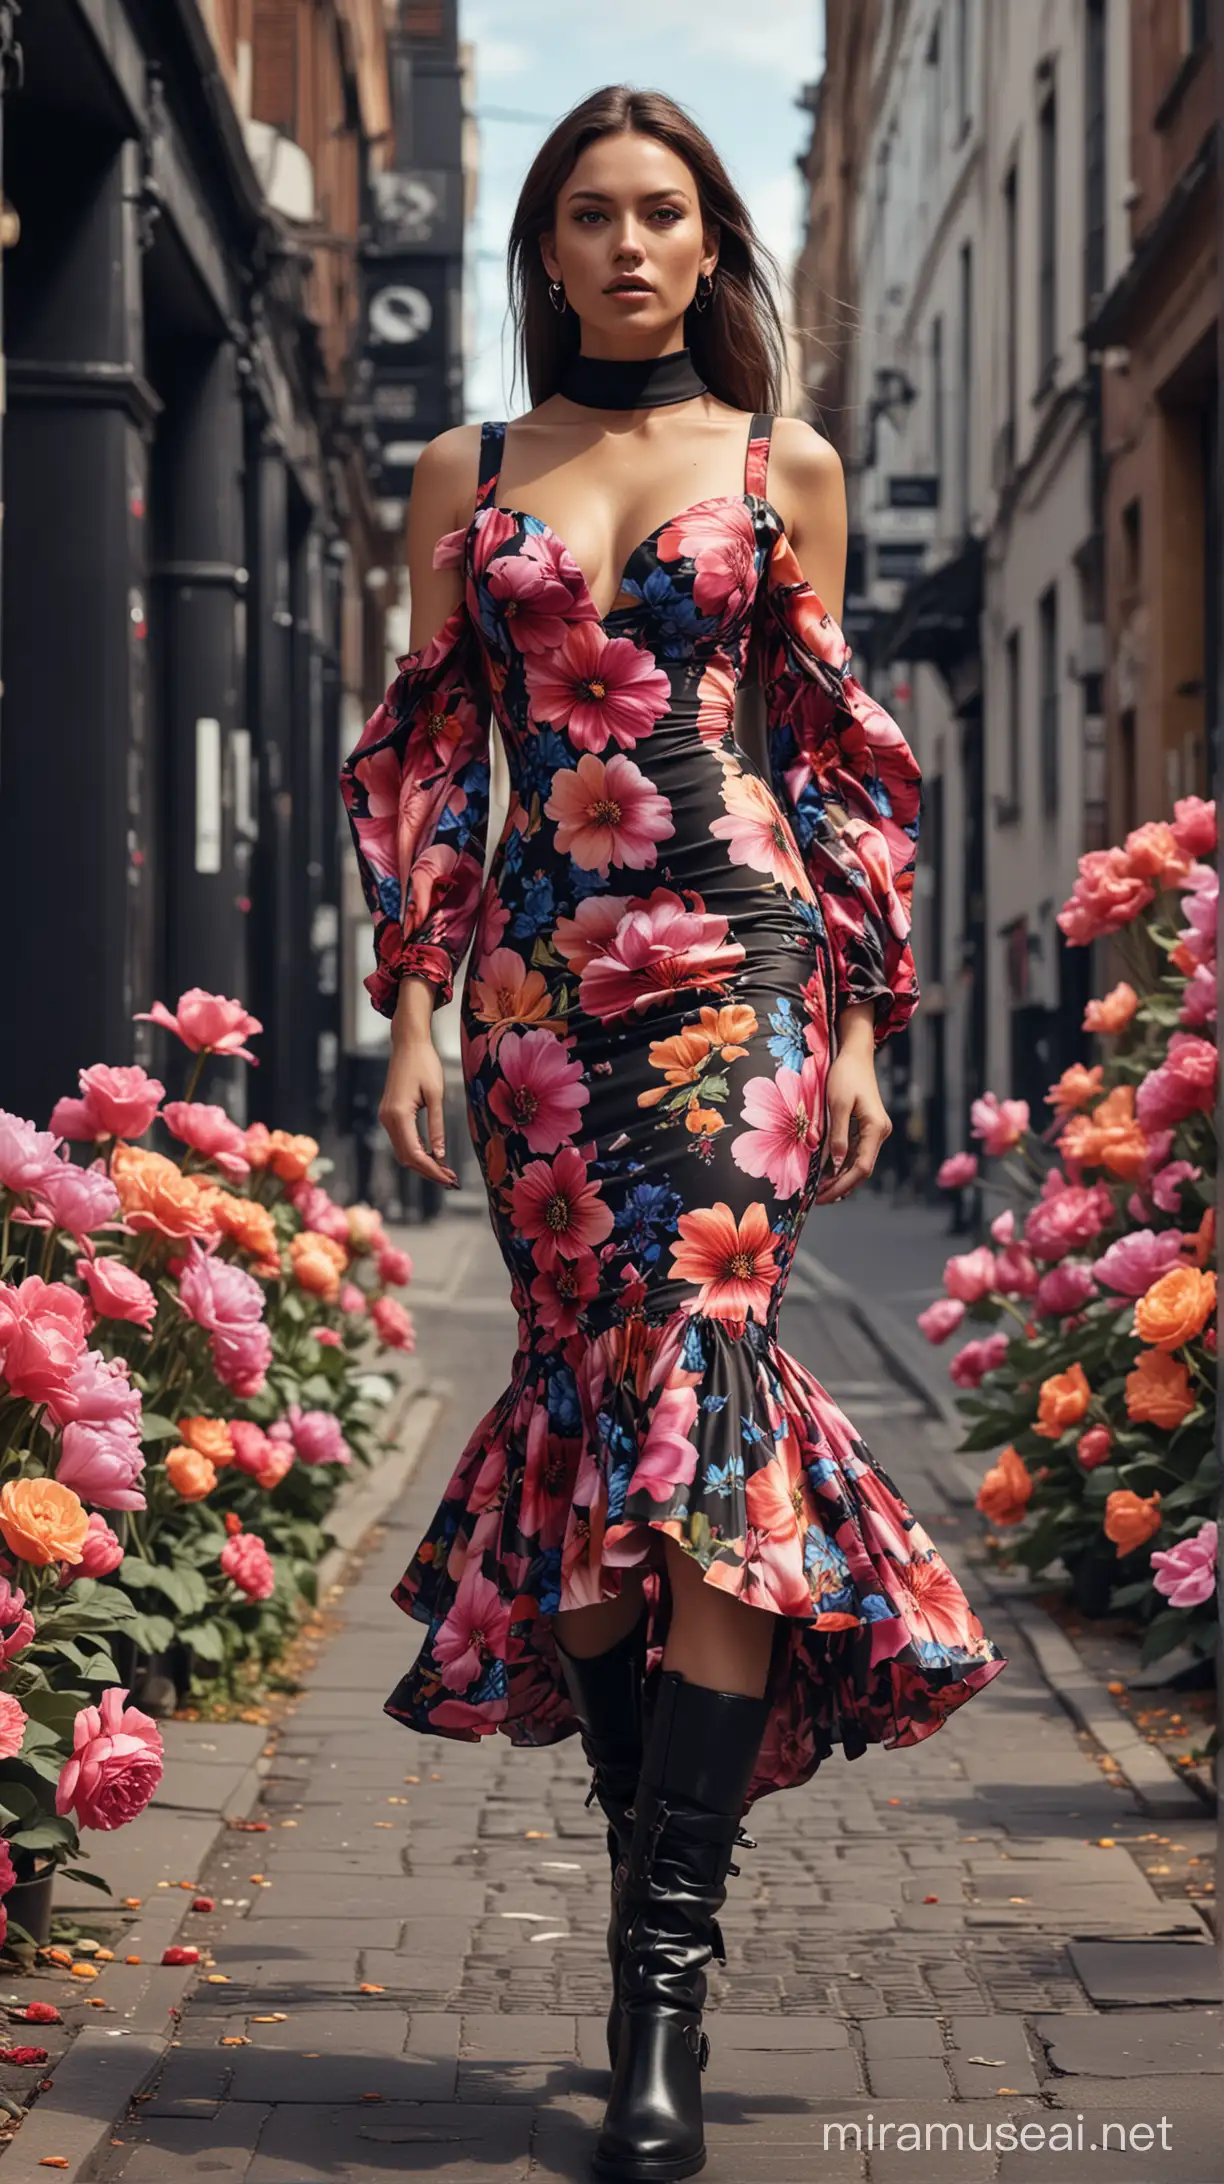 Stunning supermodel, street motion, front angle, wearing large oversized flowers dress ,black punk boots , vibrant colors , glam, hyper-realistic, Alexander McQueen style